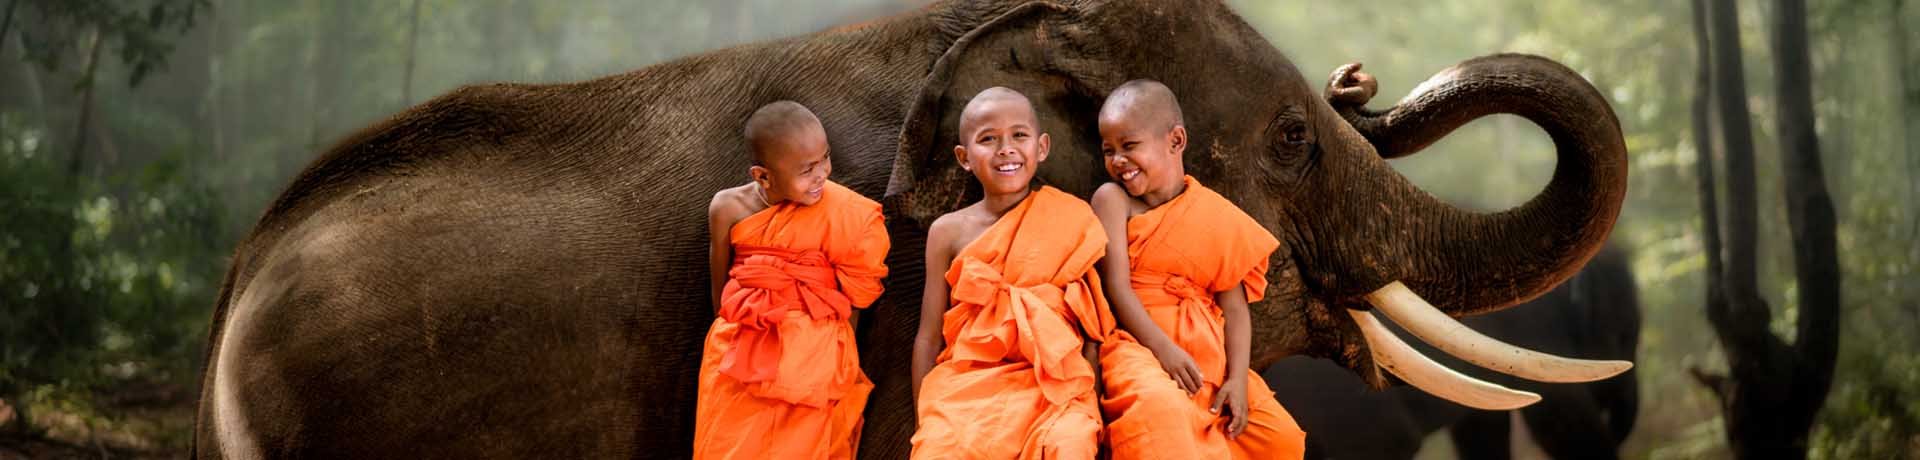 Monks with Elephant